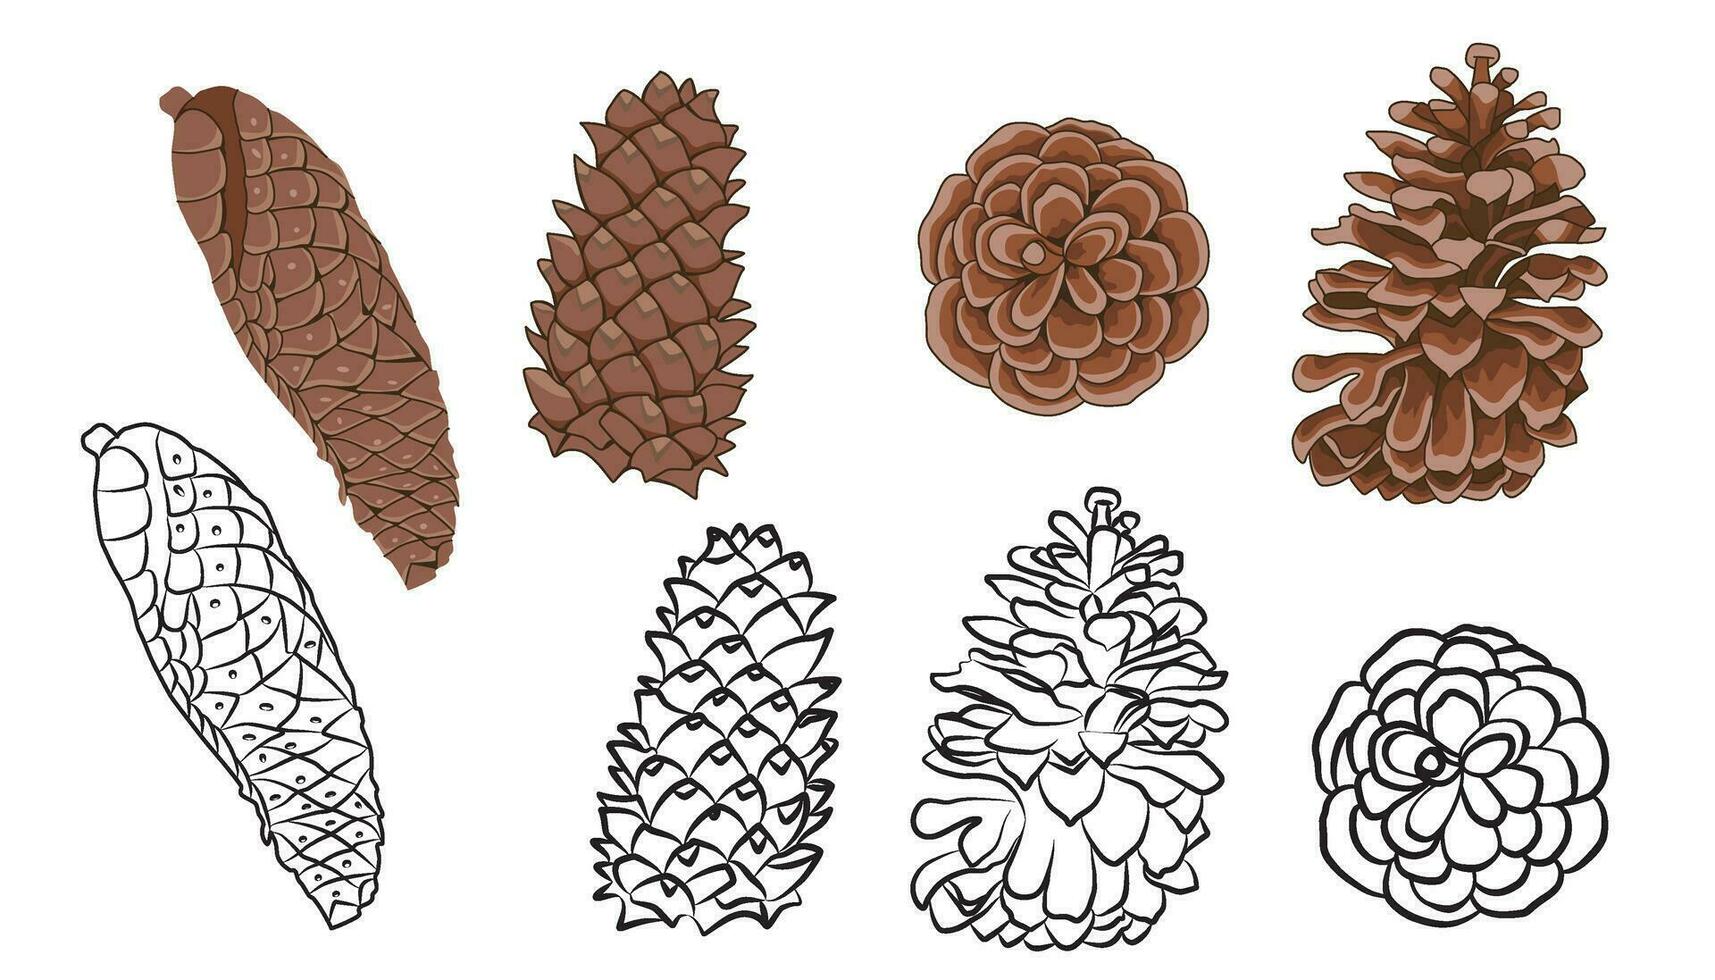 A collection of pinecone illustrations, including hand-drawn black and white line art. vector